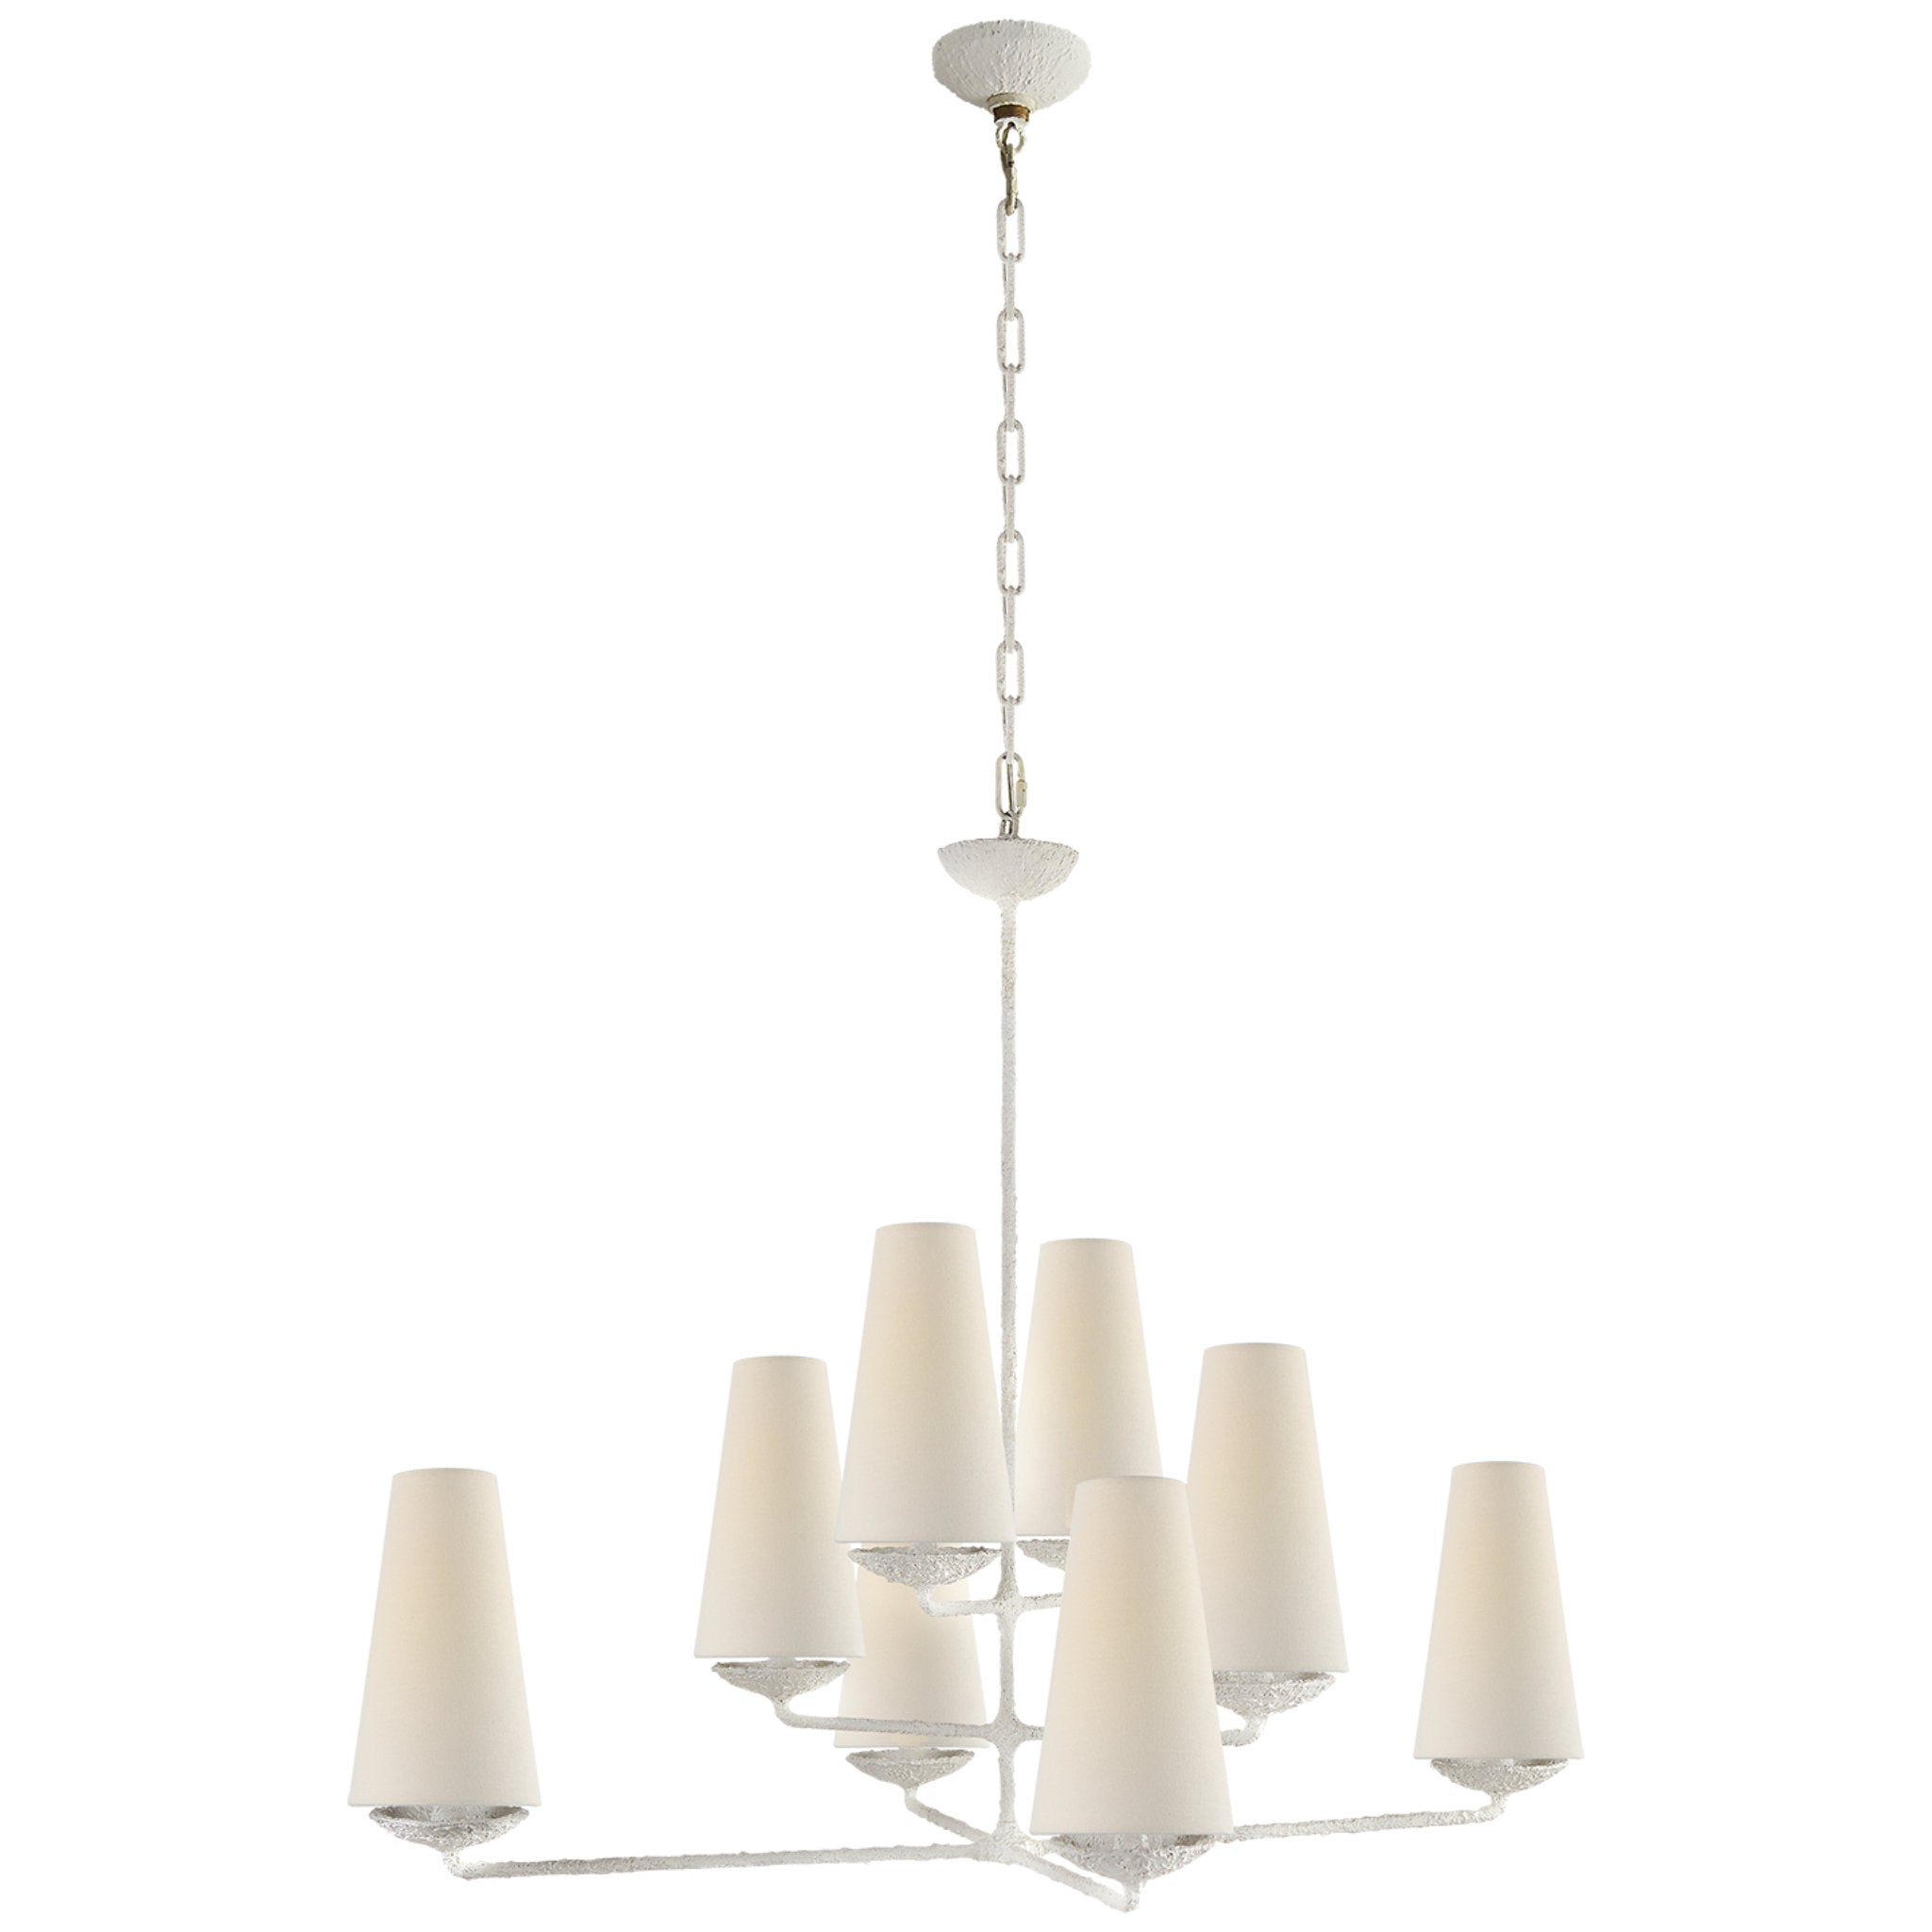 AERIN Fontaine Large Offset Chandelier in Plaster White with Linen Shades